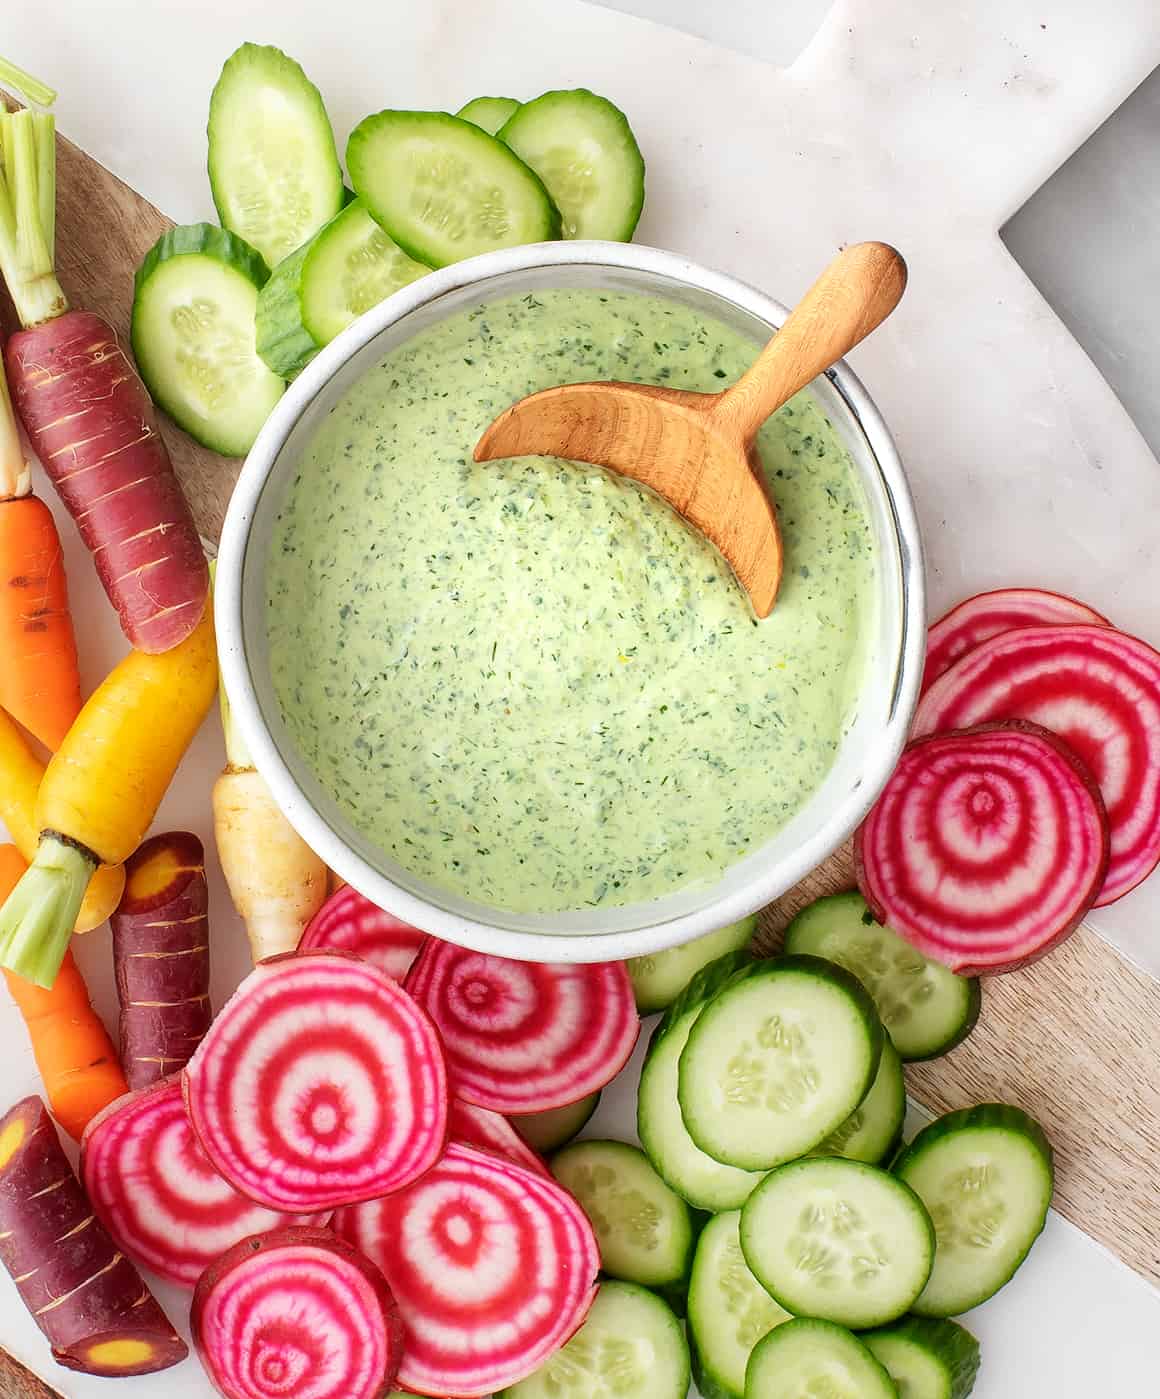 Green goddess dressing in a bowl with vegetables